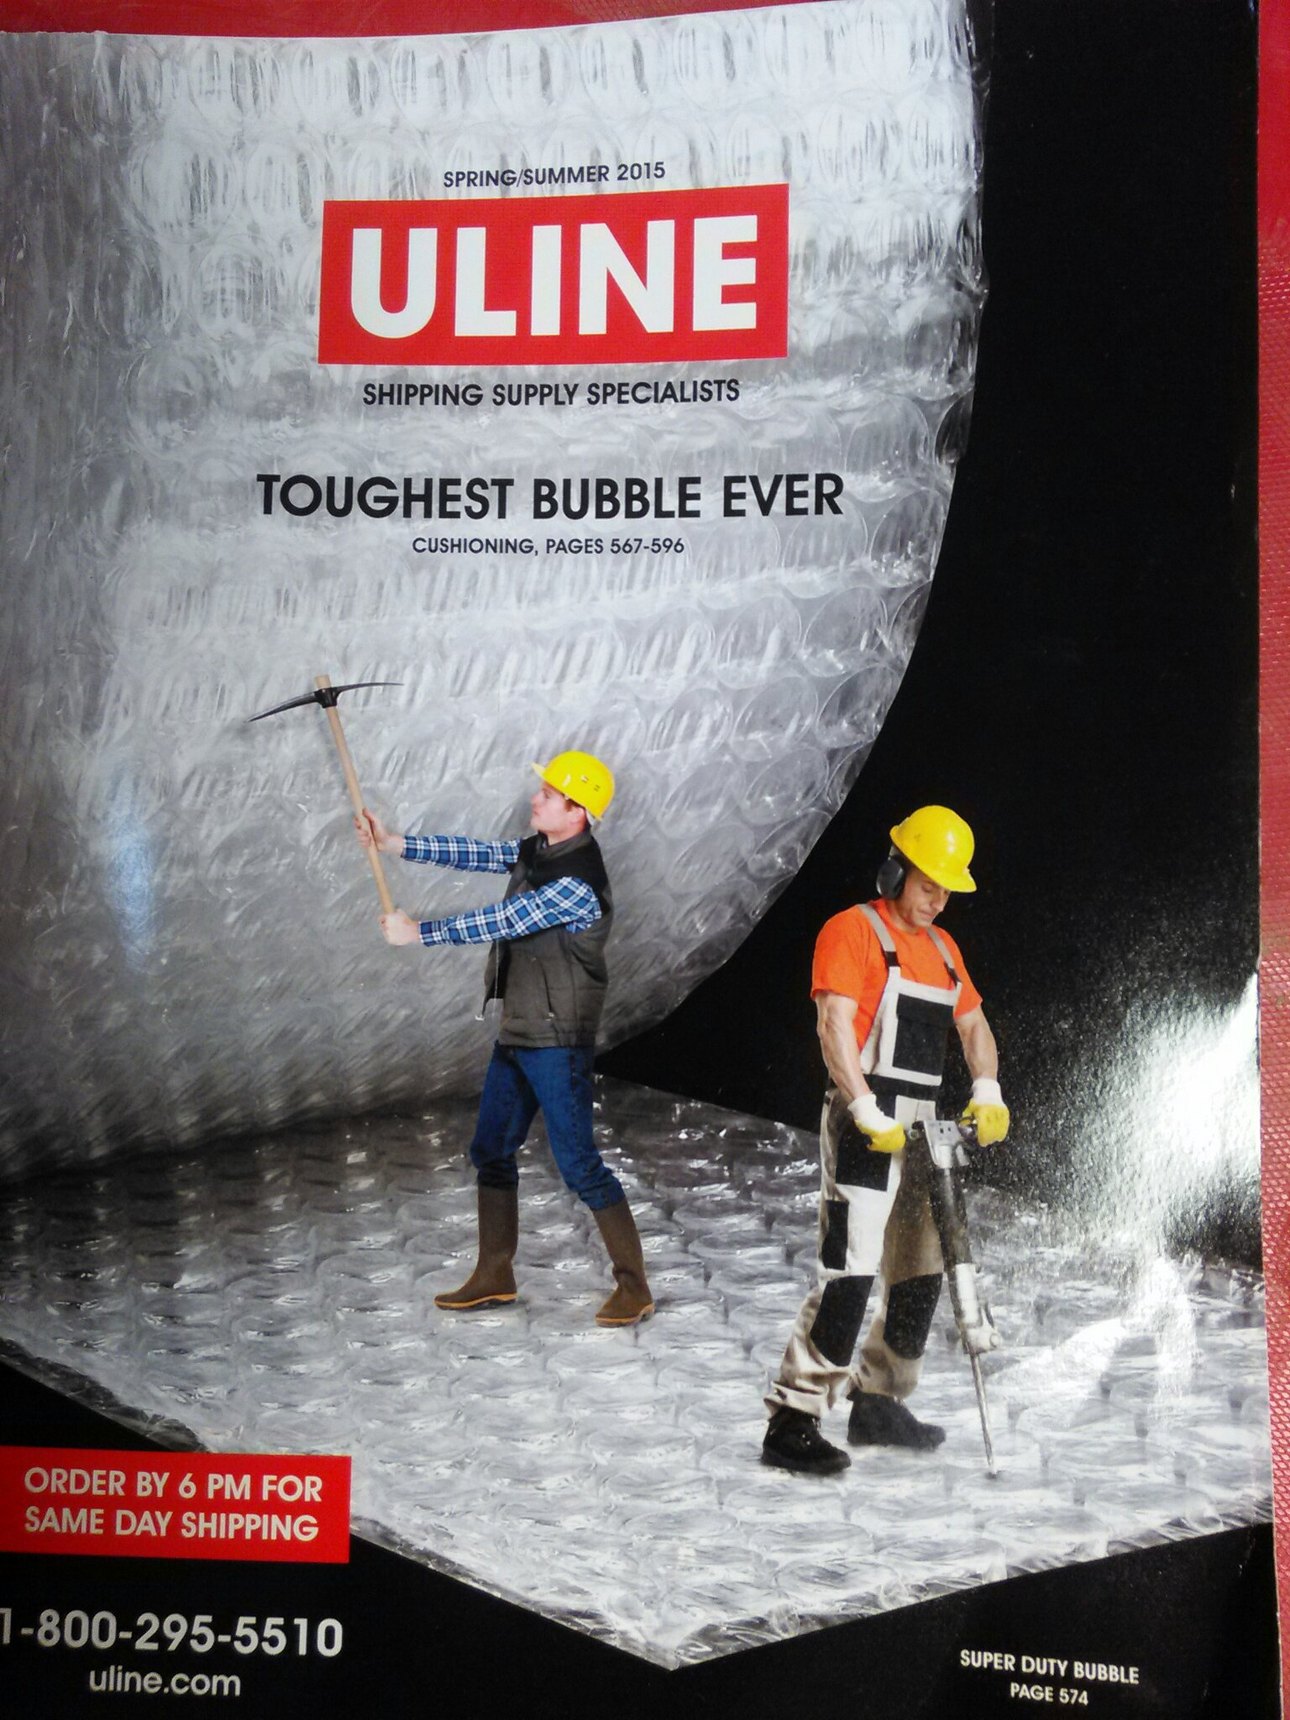 Uline knows what's up - meme